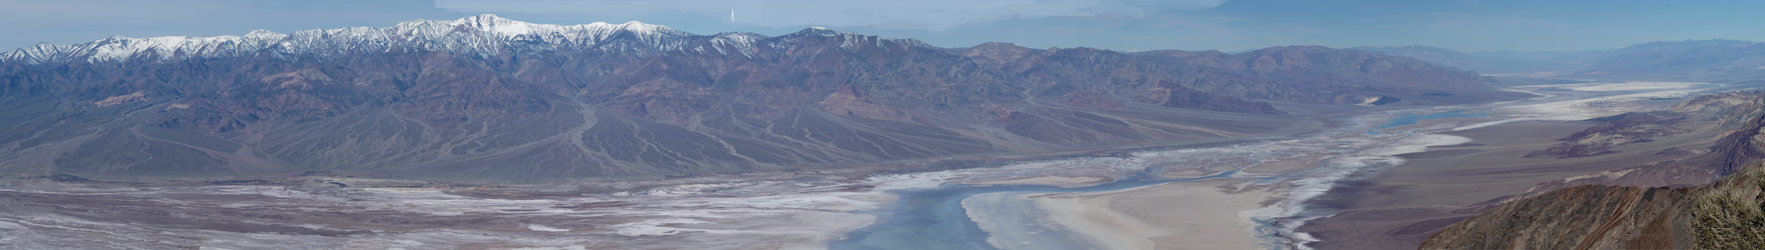 Dante's View Panorama Death Valley CA